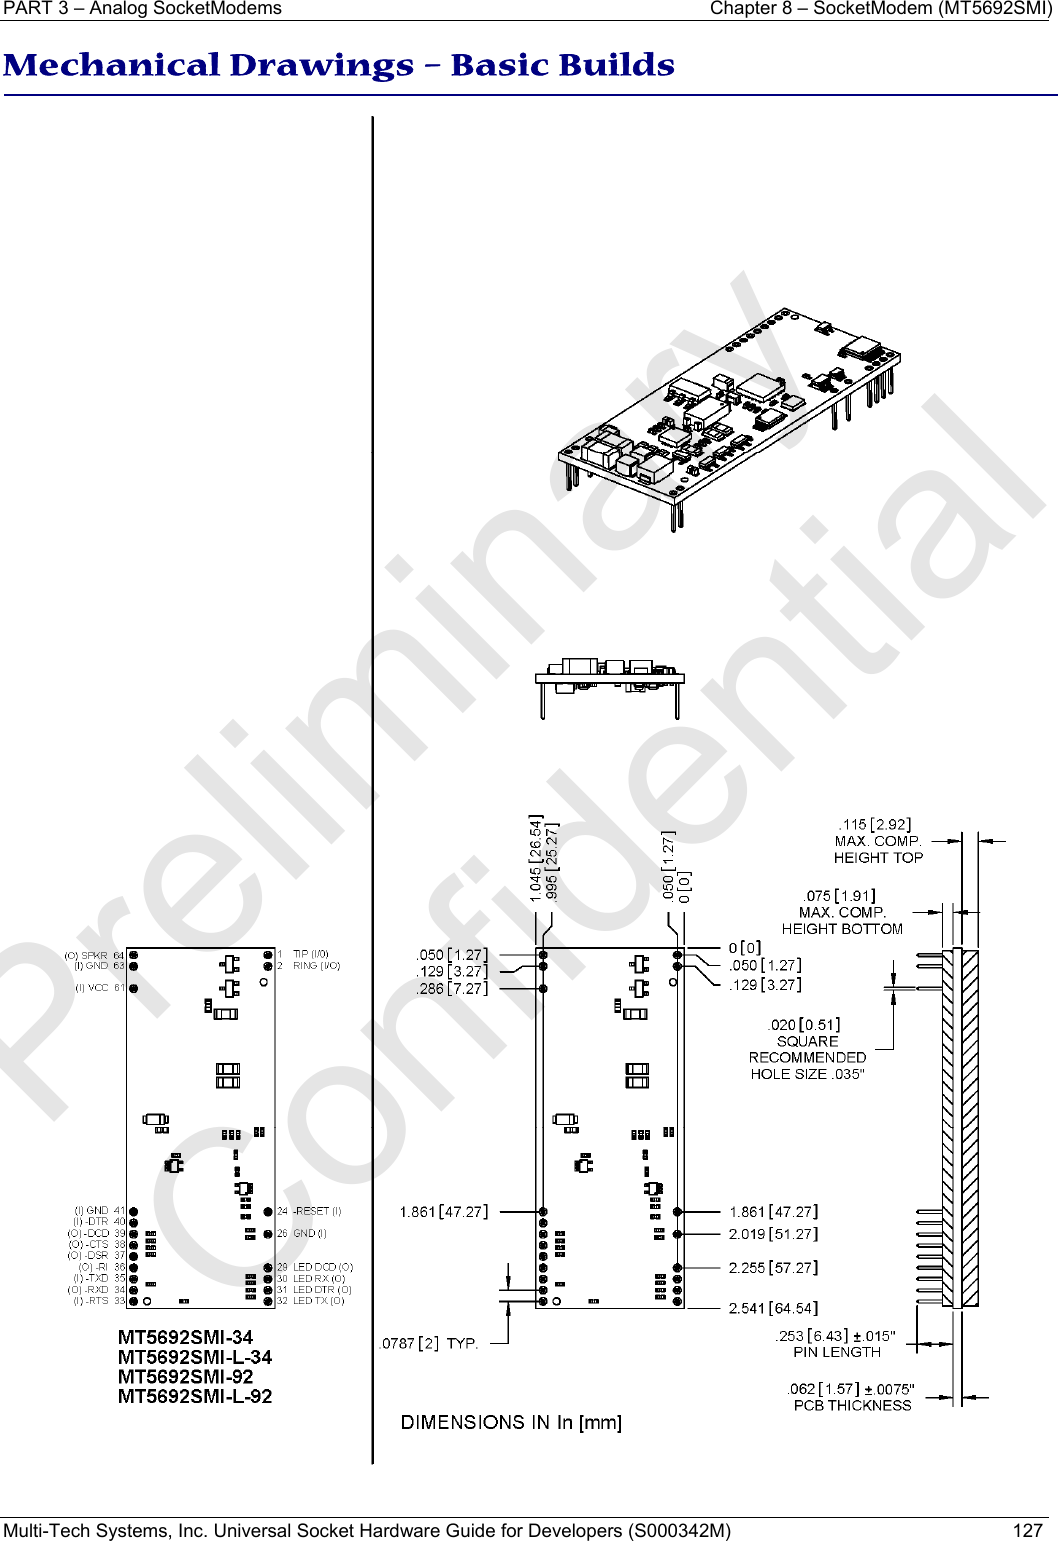 PART 3 – Analog SocketModems    Chapter 8 – SocketModem (MT5692SMI) Multi-Tech Systems, Inc. Universal Socket Hardware Guide for Developers (S000342M)  127  Mechanical Drawings – Basic Builds     Preliminary  Confidential